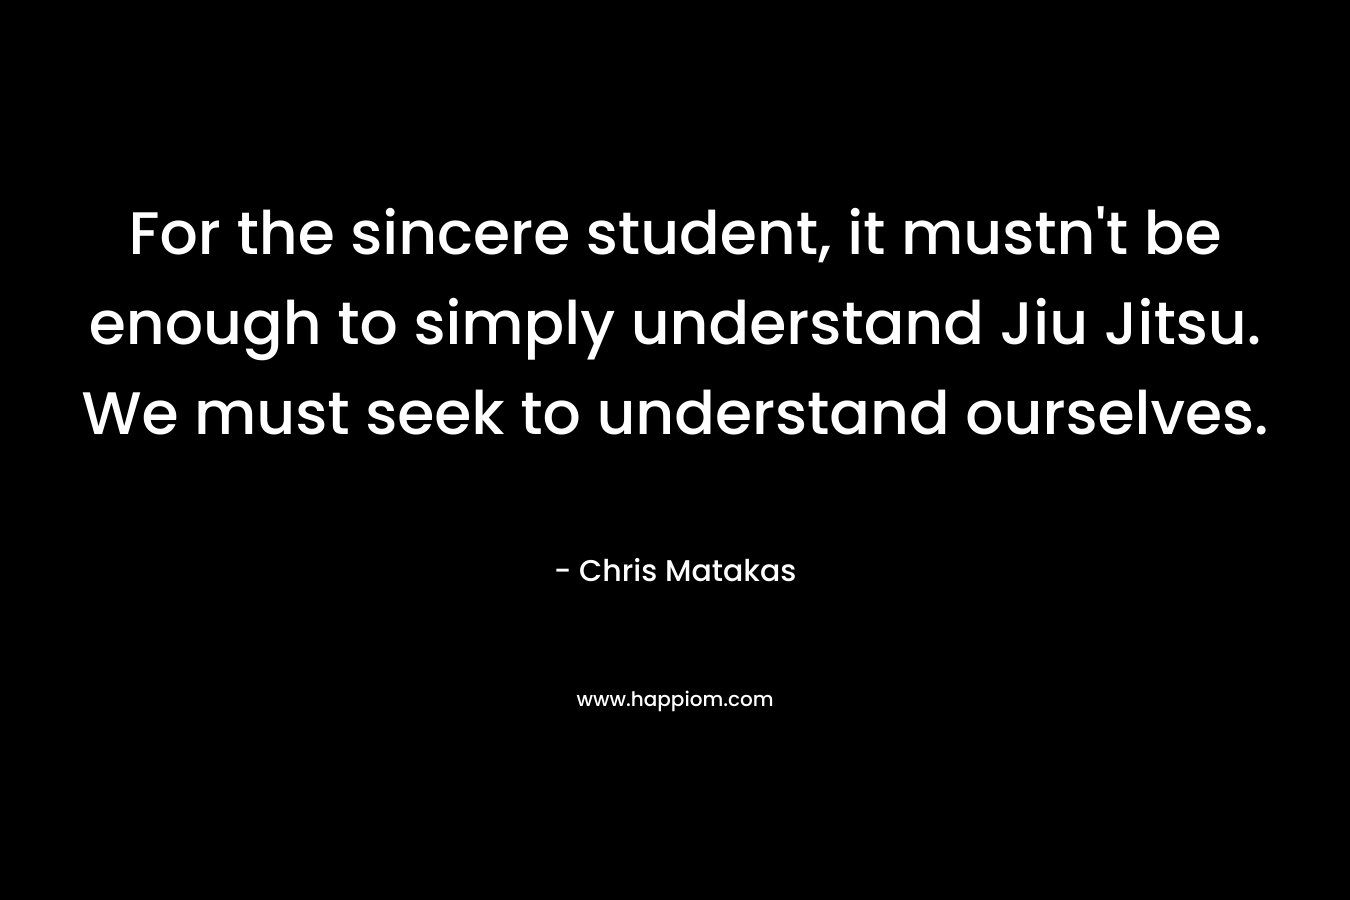 For the sincere student, it mustn't be enough to simply understand Jiu Jitsu. We must seek to understand ourselves.